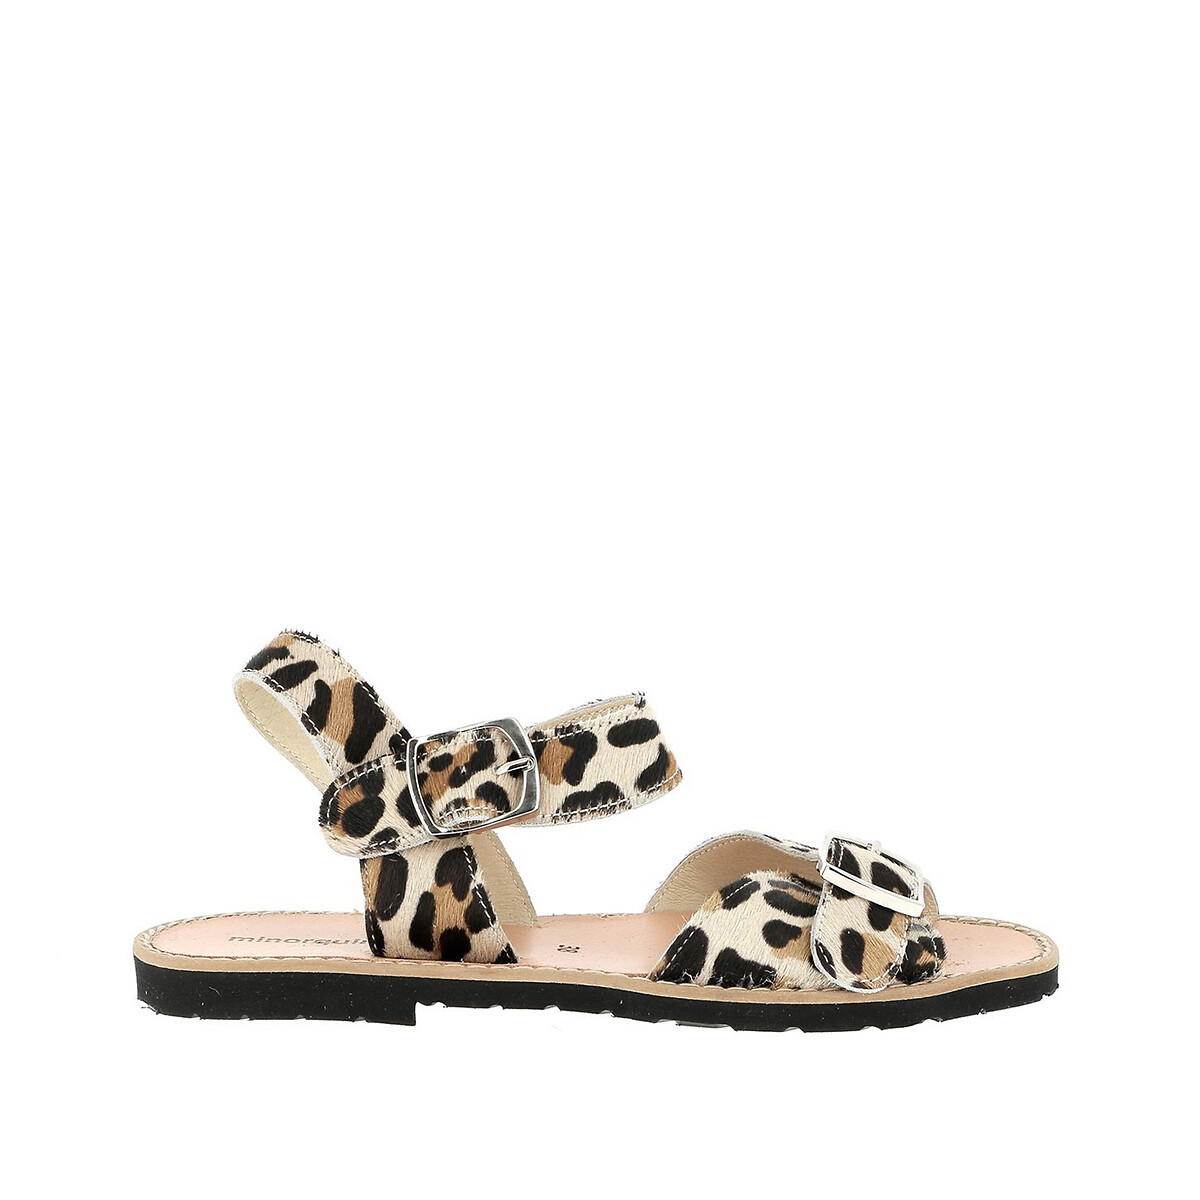 Avarca Boucle Leopard Sandals with Flat Heel in Leather